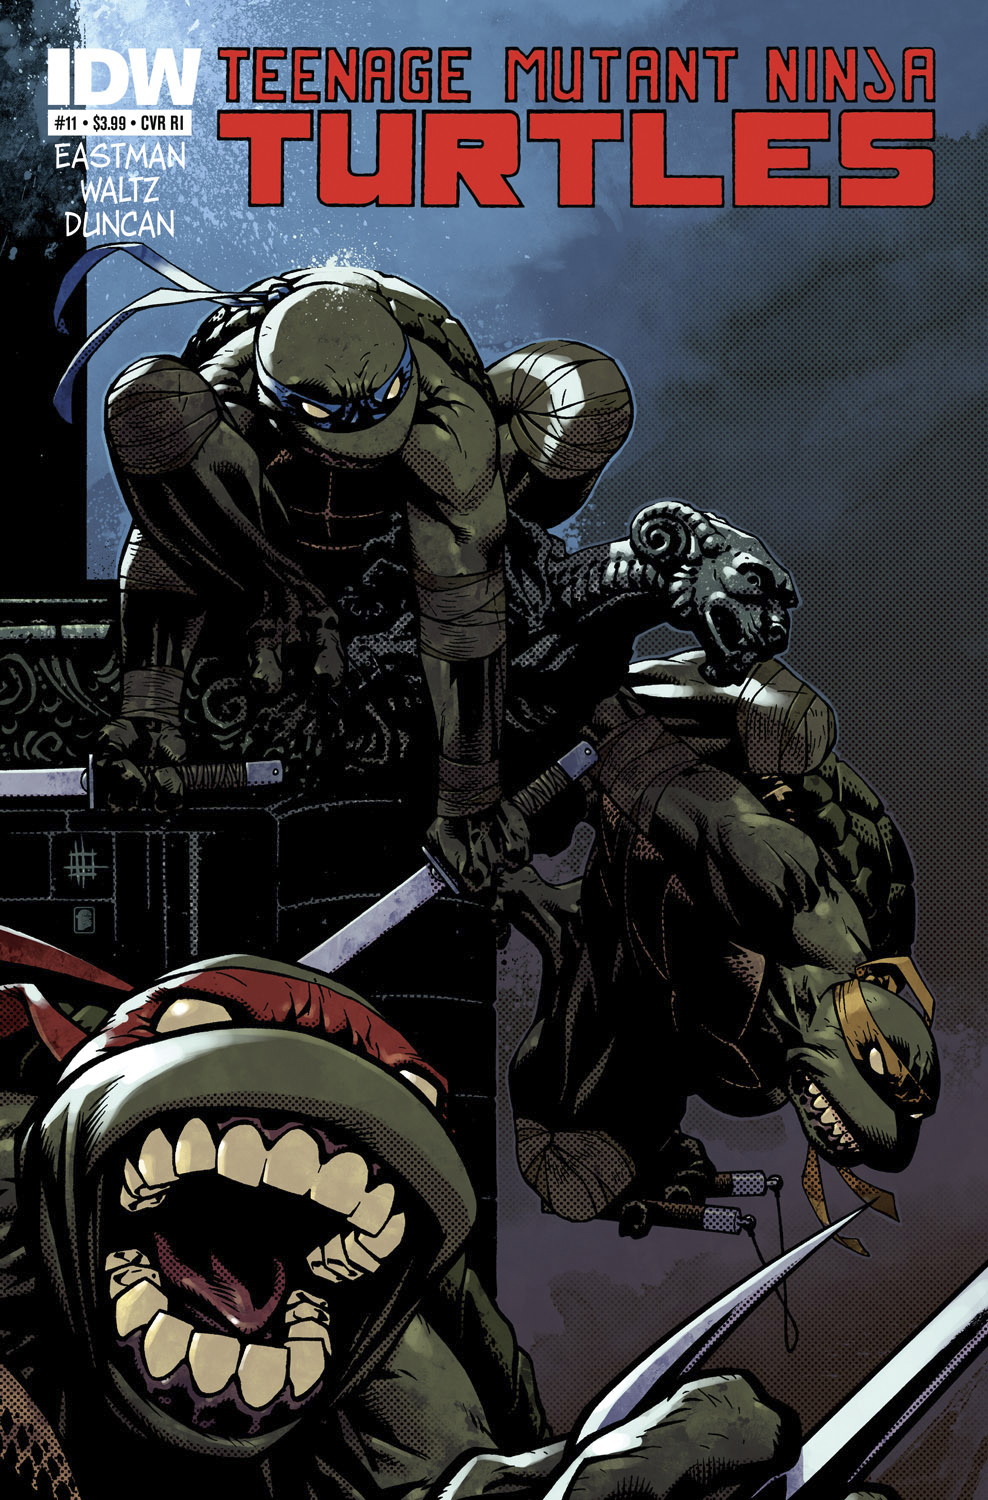 TMNT ONGOING #11